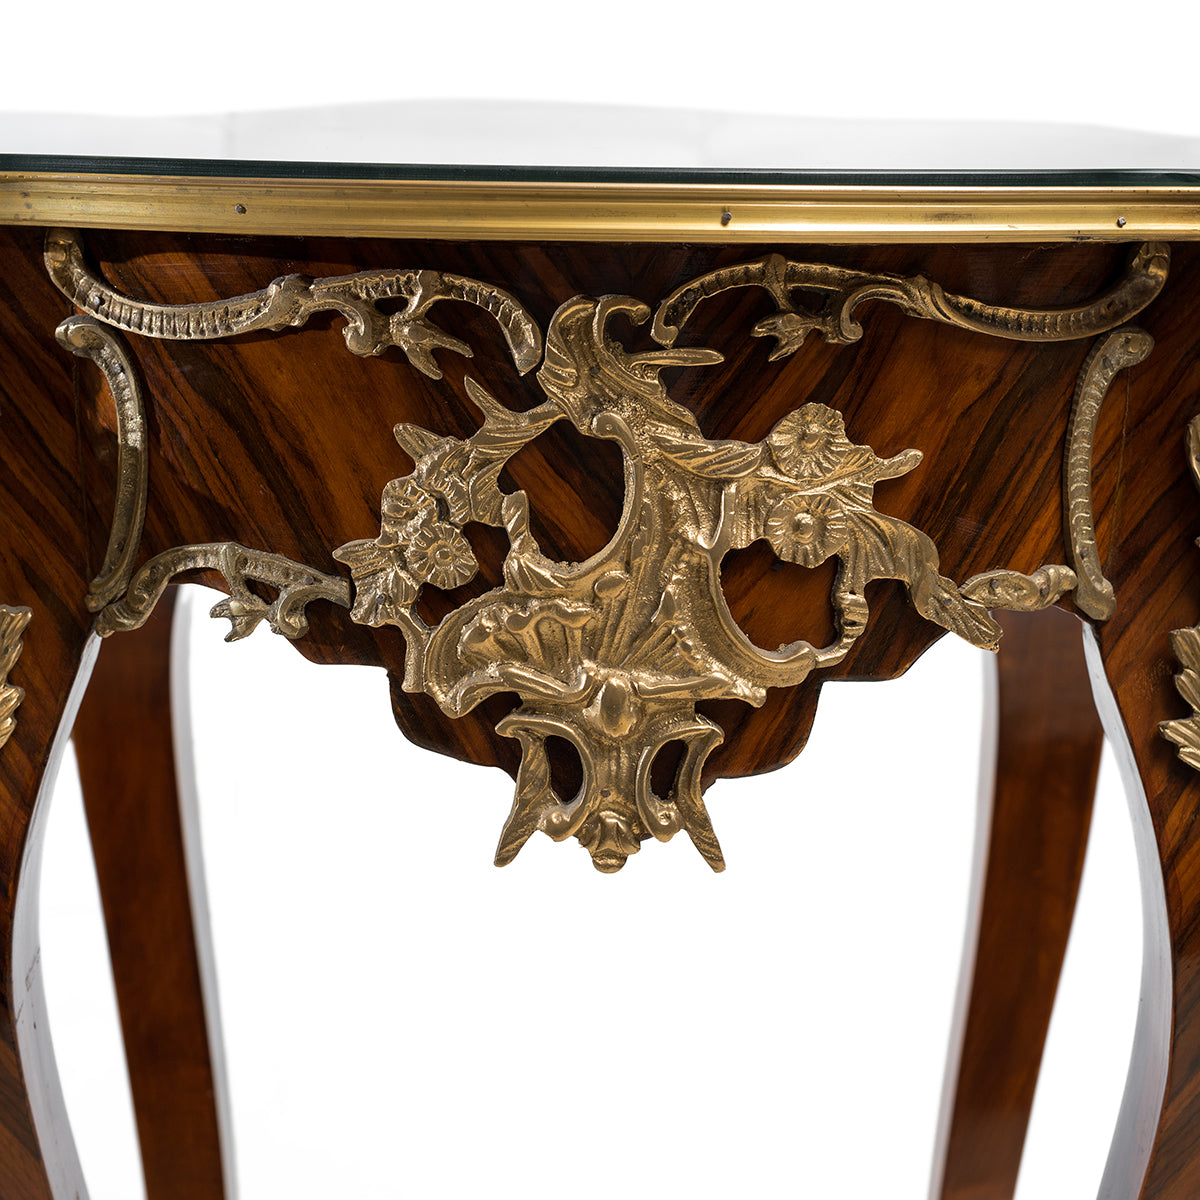 Louis XV style ormolu mounted and marquetry inlaid side table (2 set)